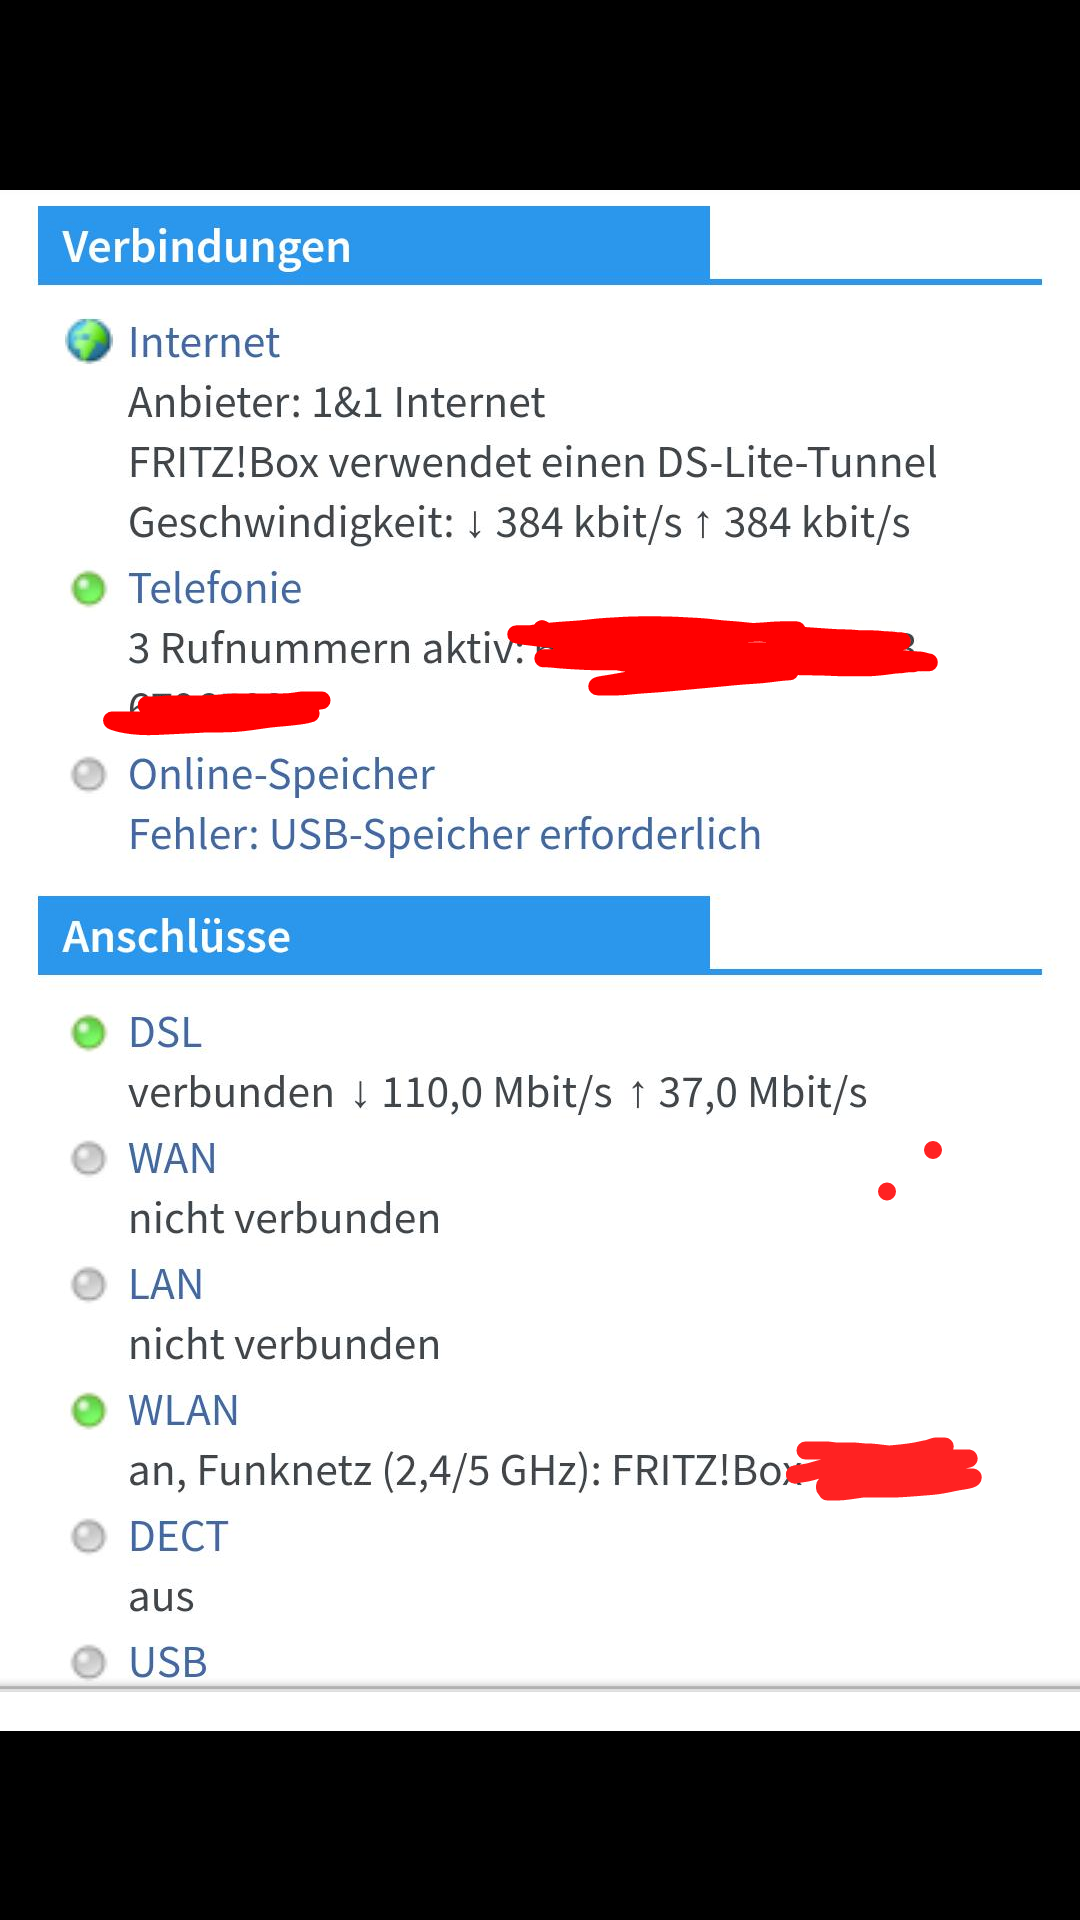 Internet suddenly very slow, what does Fritzbox mean